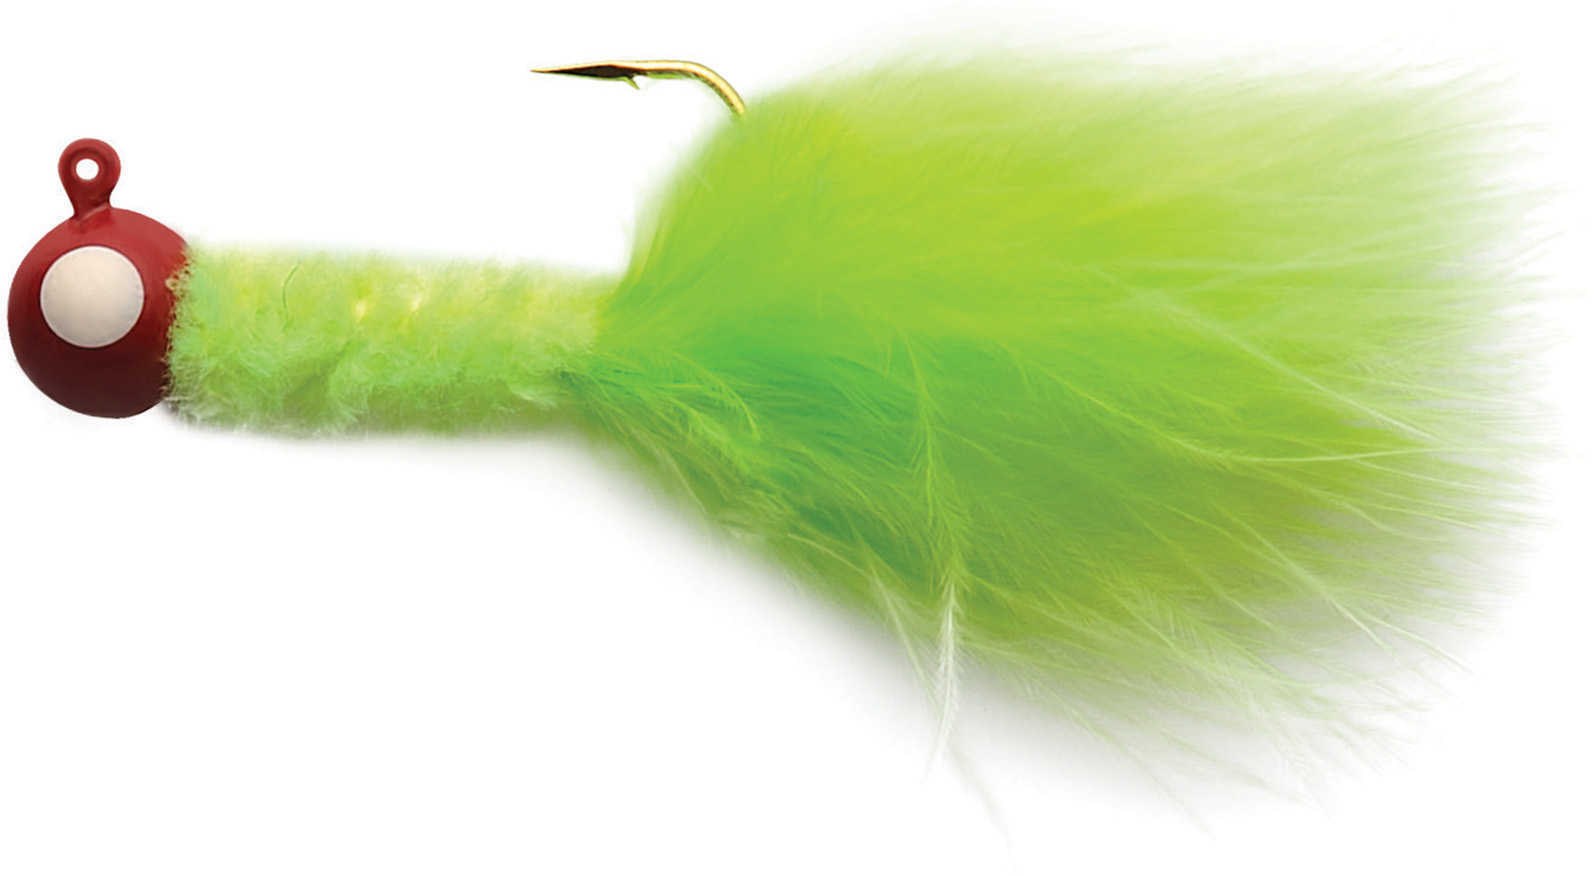 Eagle Claw Fishing Tackle Crappie Jig 1/32 oz Red-Chartreuse Md: ECJC1/32-RC